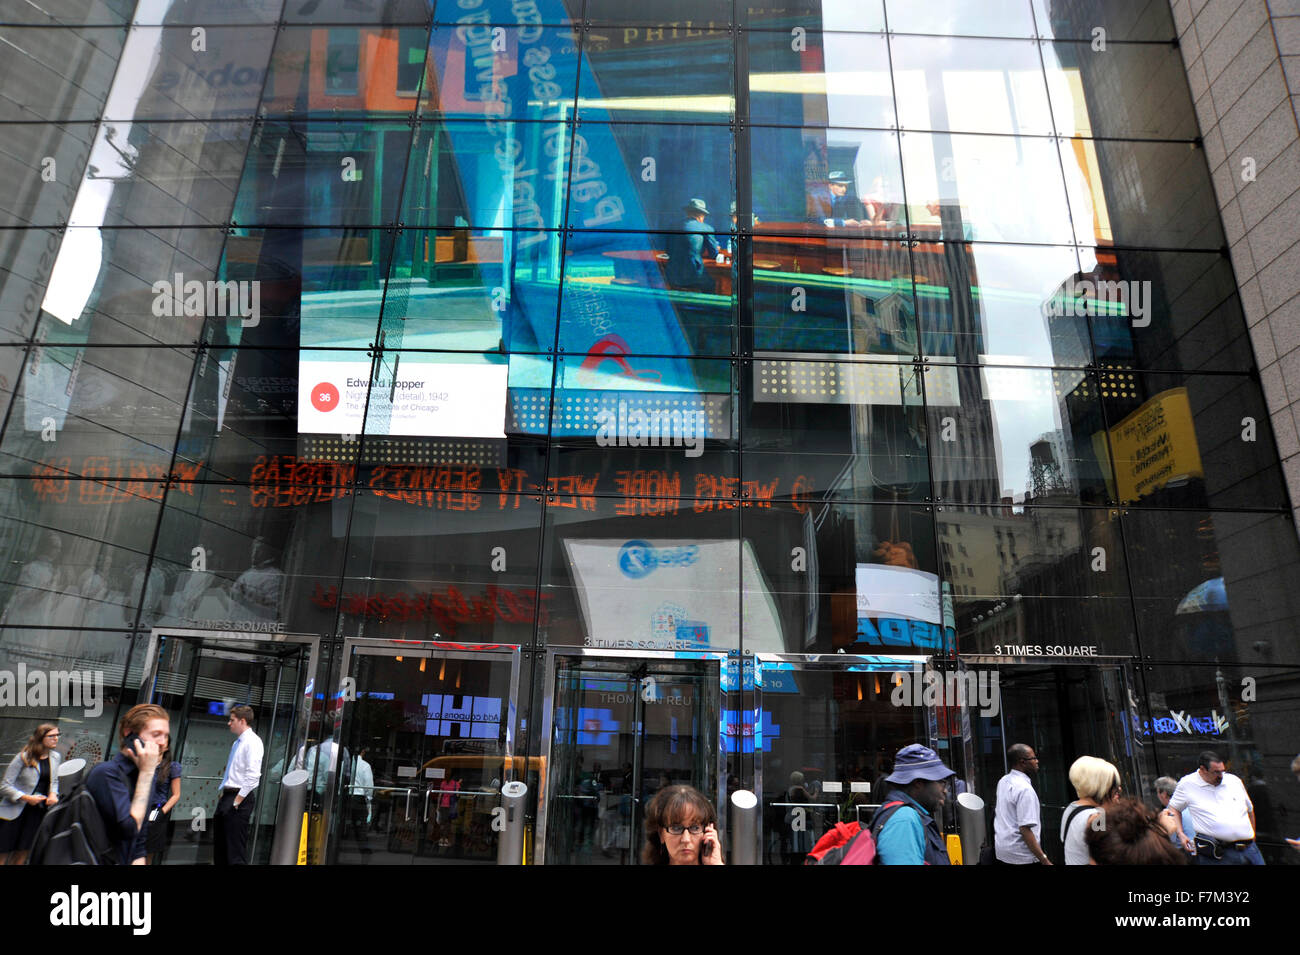 Edward Hopper painting appears on digital billboard in New York's Times Square as part of the Art Everywhere event Stock Photo